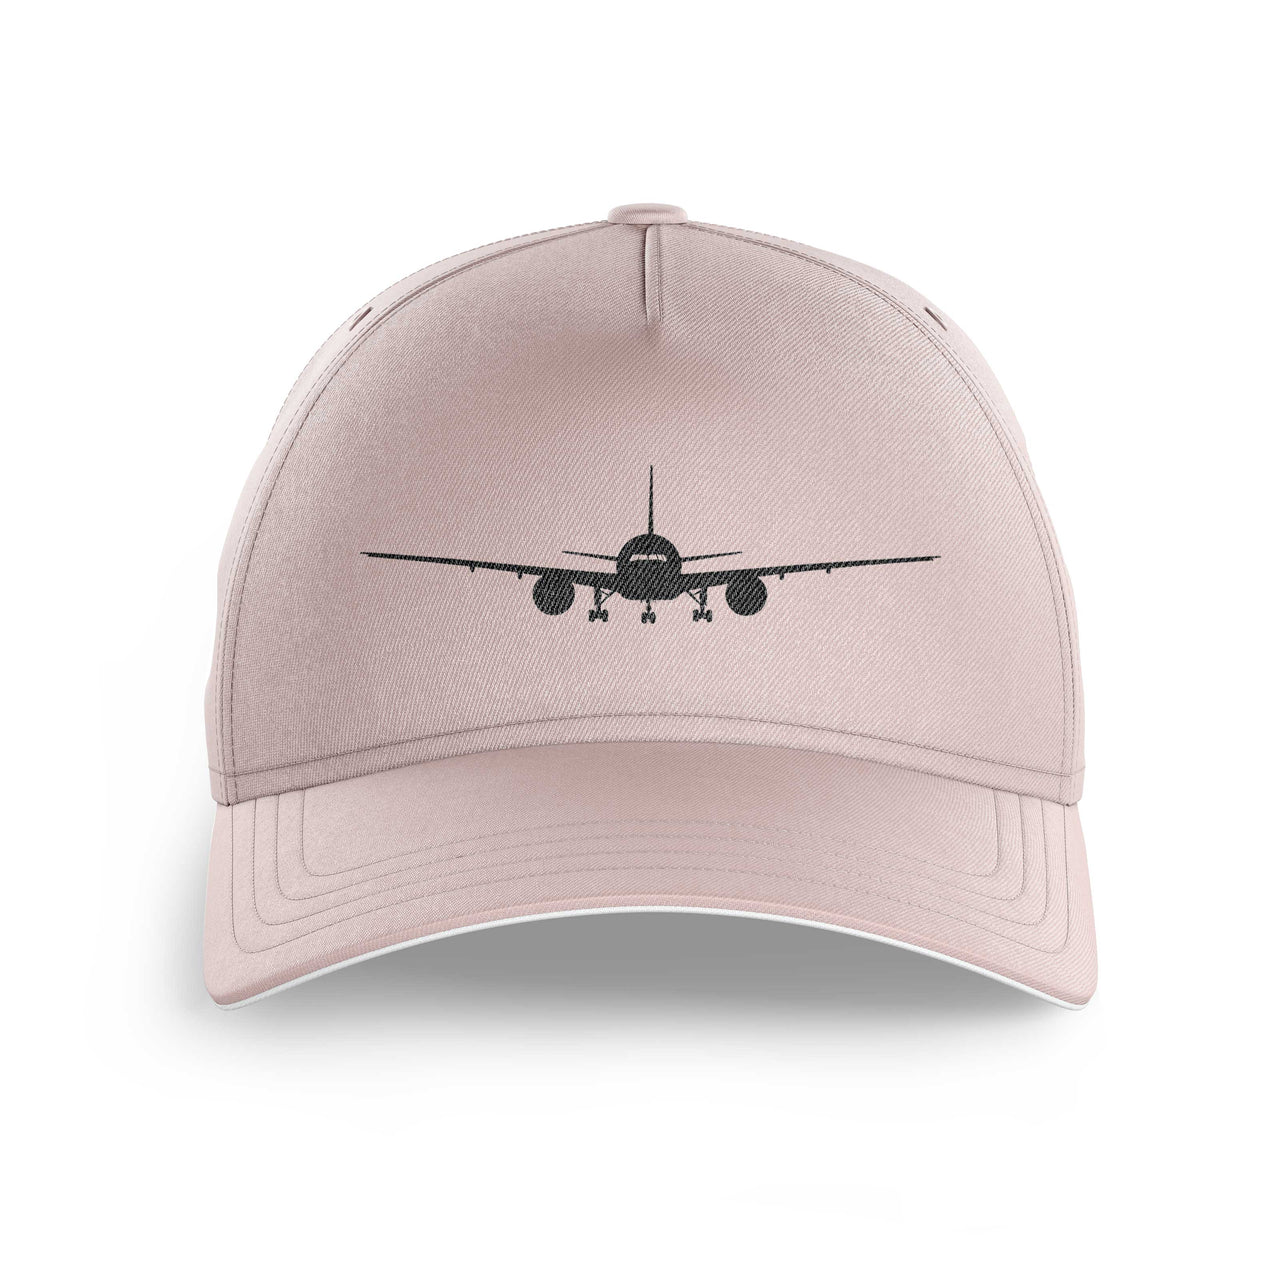 Boeing 777 Silhouette Printed Hats